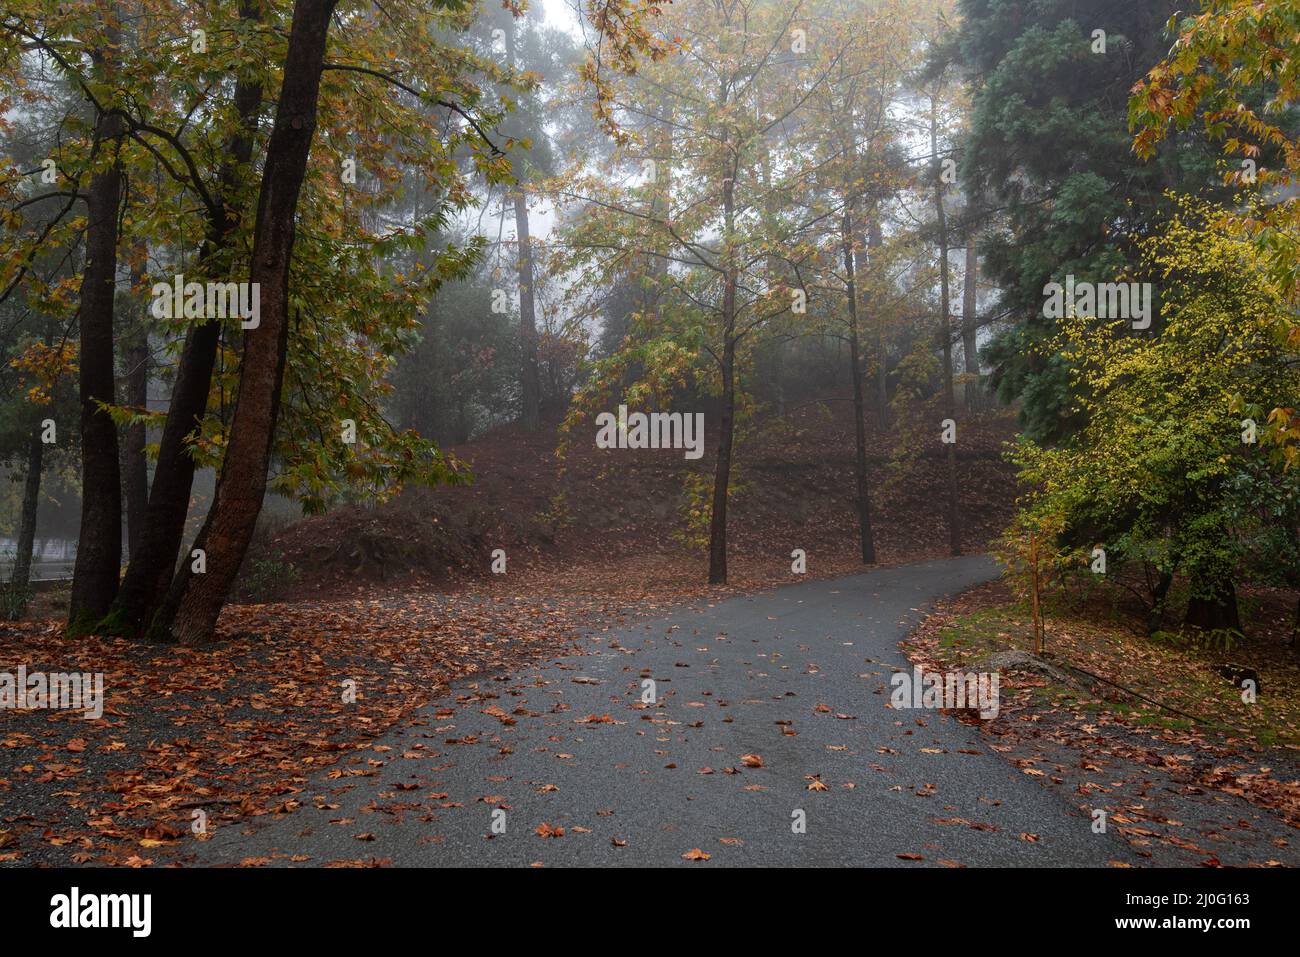 Autumn landscape with empty rural road and yellow leaves on the trees in the forest Stock Photo